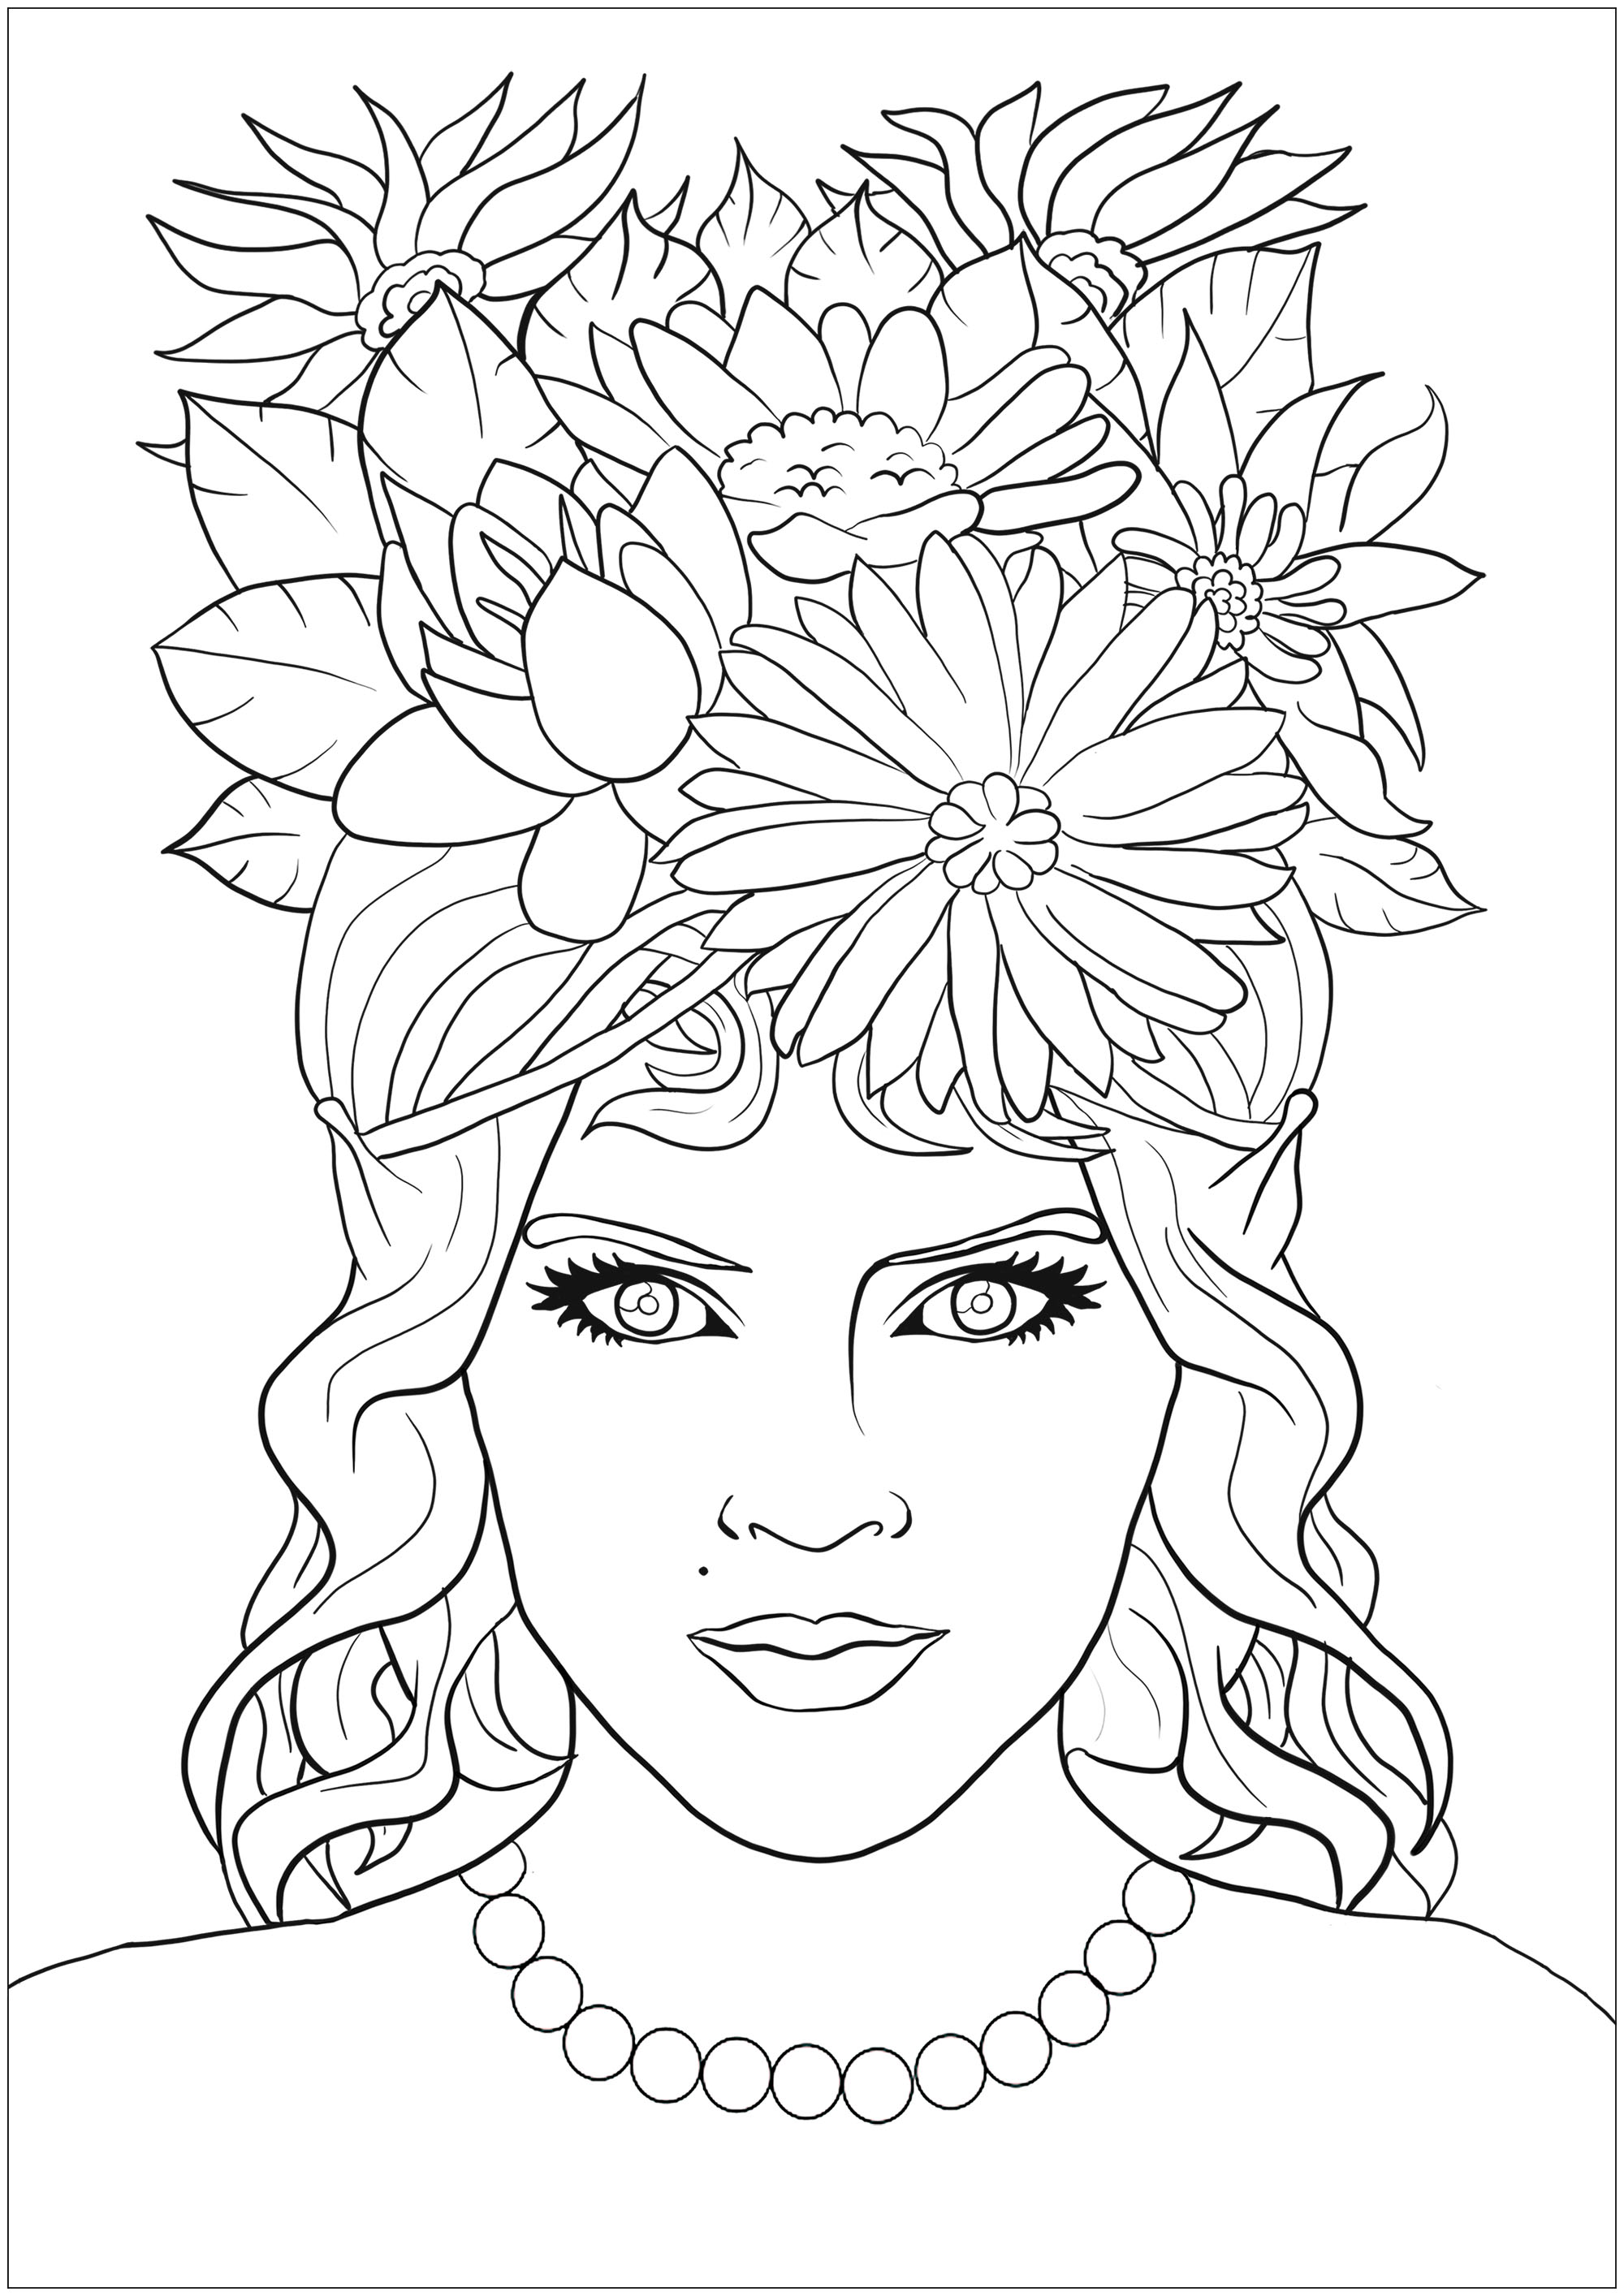 Woman Coloring Pages Easy - Draggolia